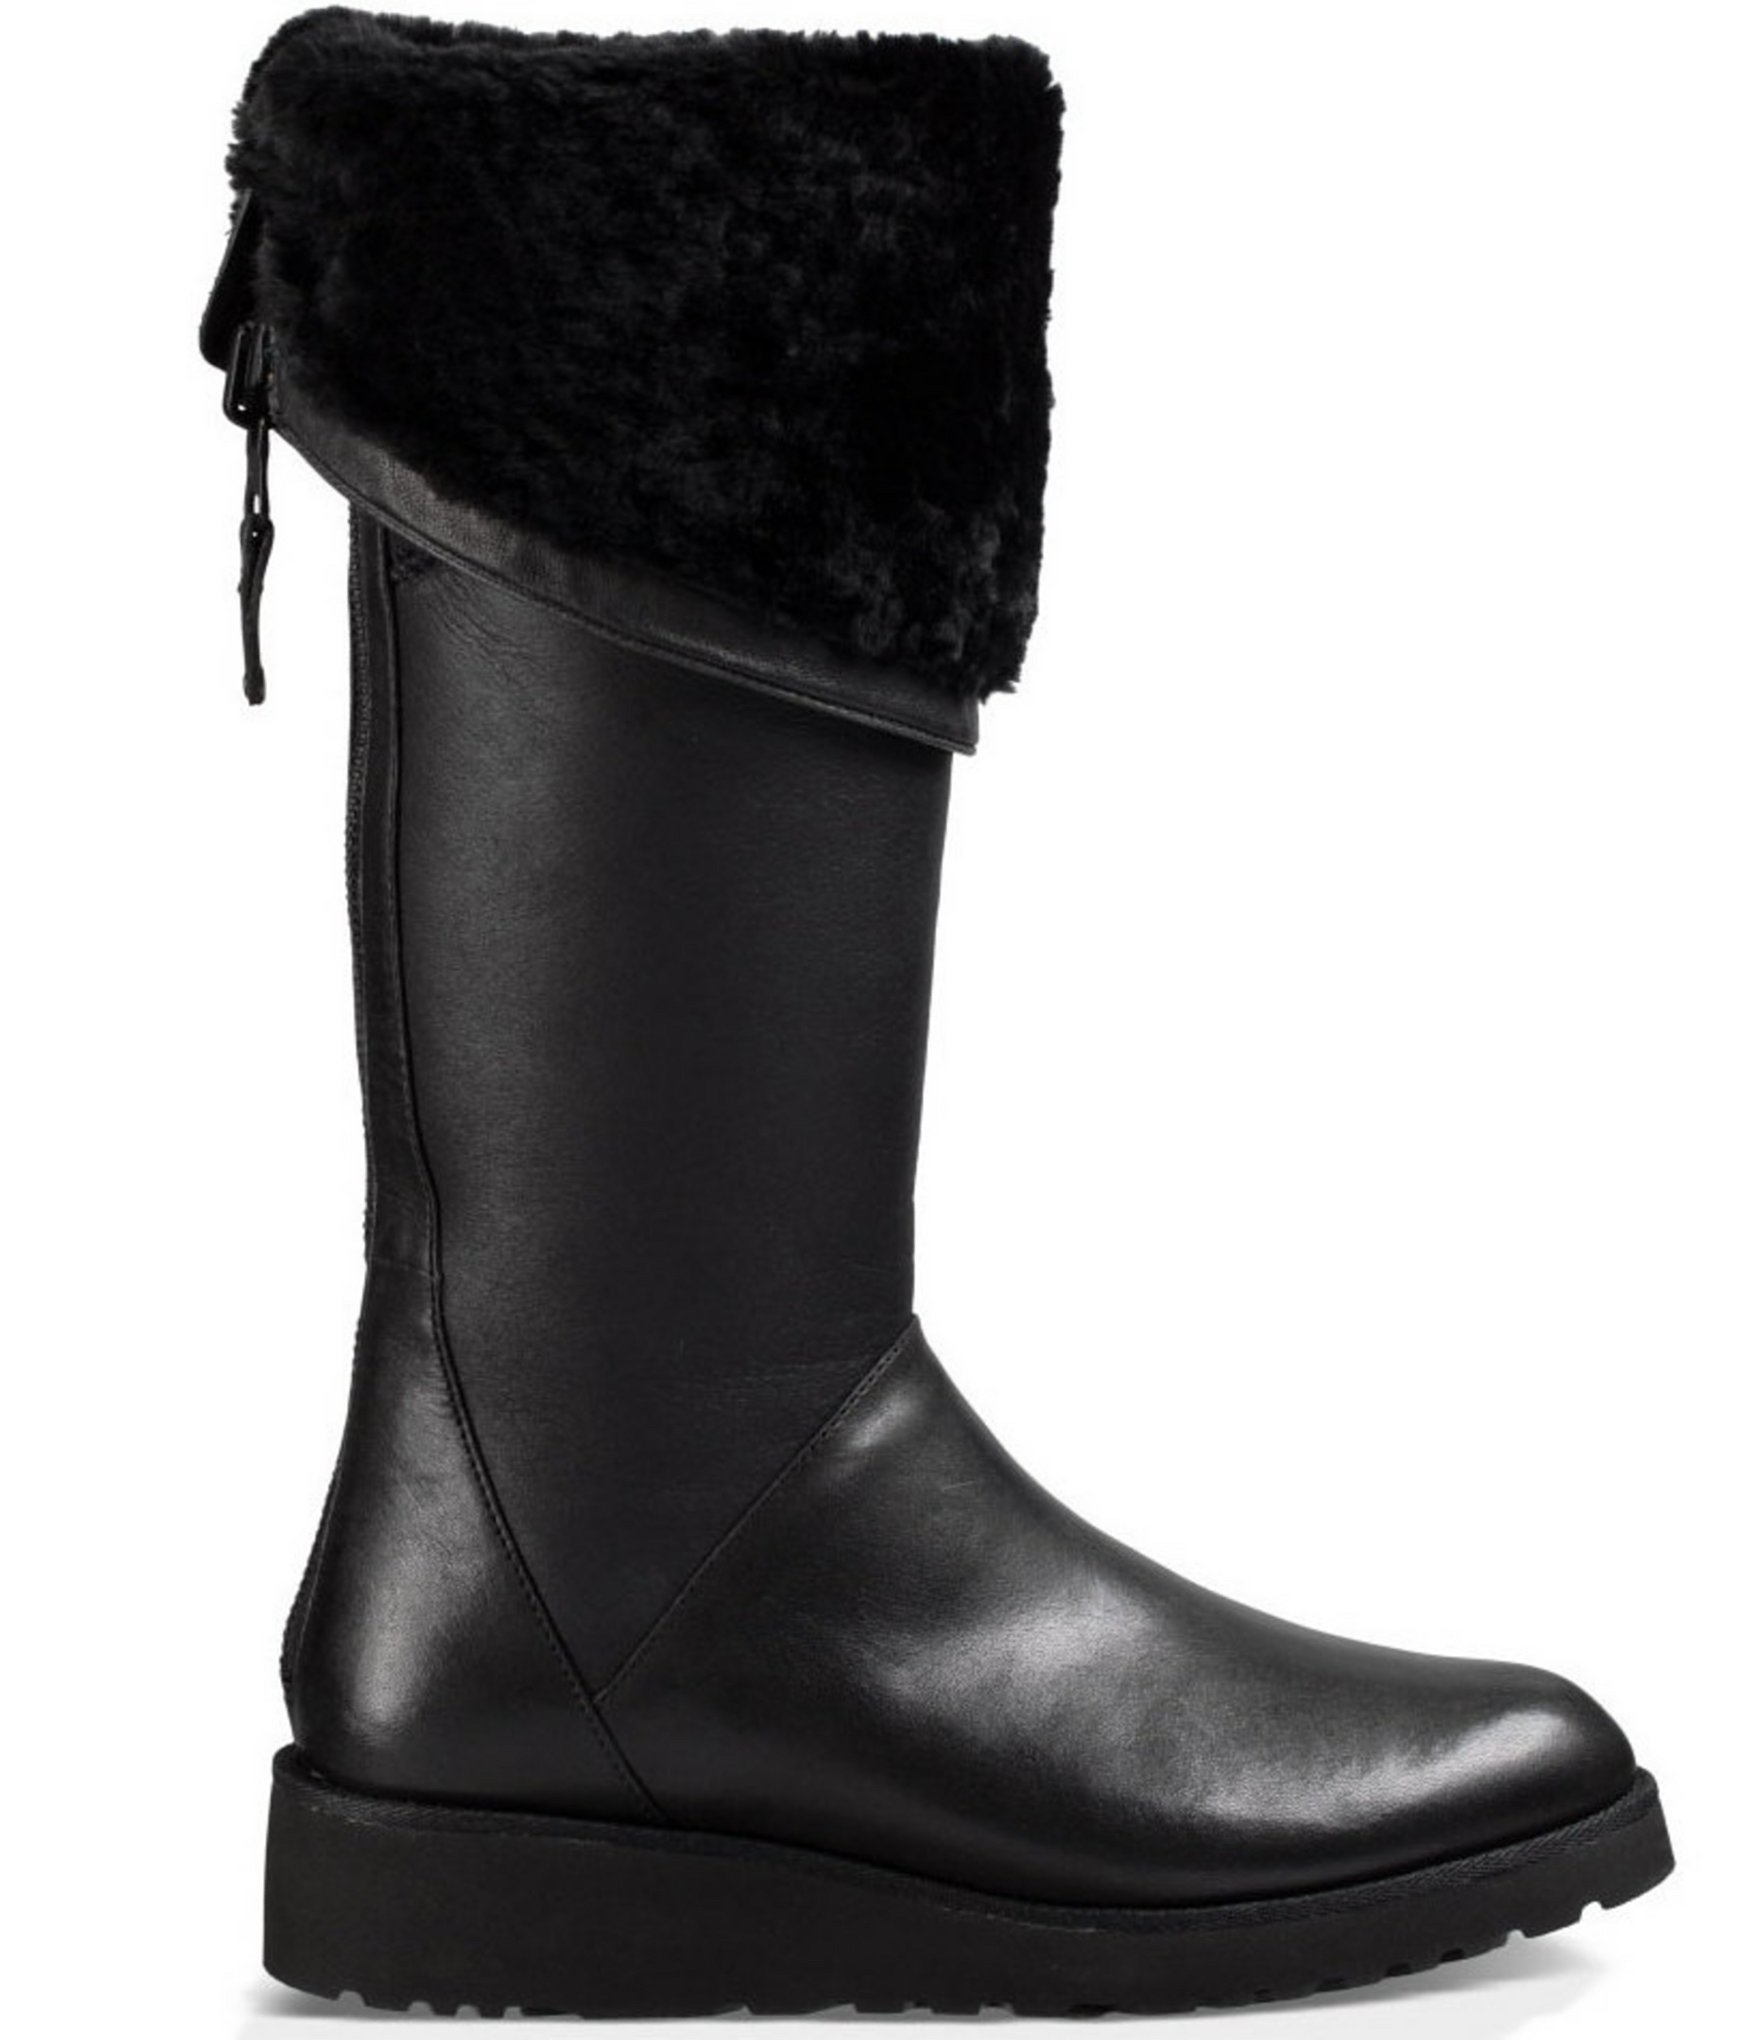 Lyst - Ugg Kendi Sheepskin And Leather Wedge Tall Boots in Black